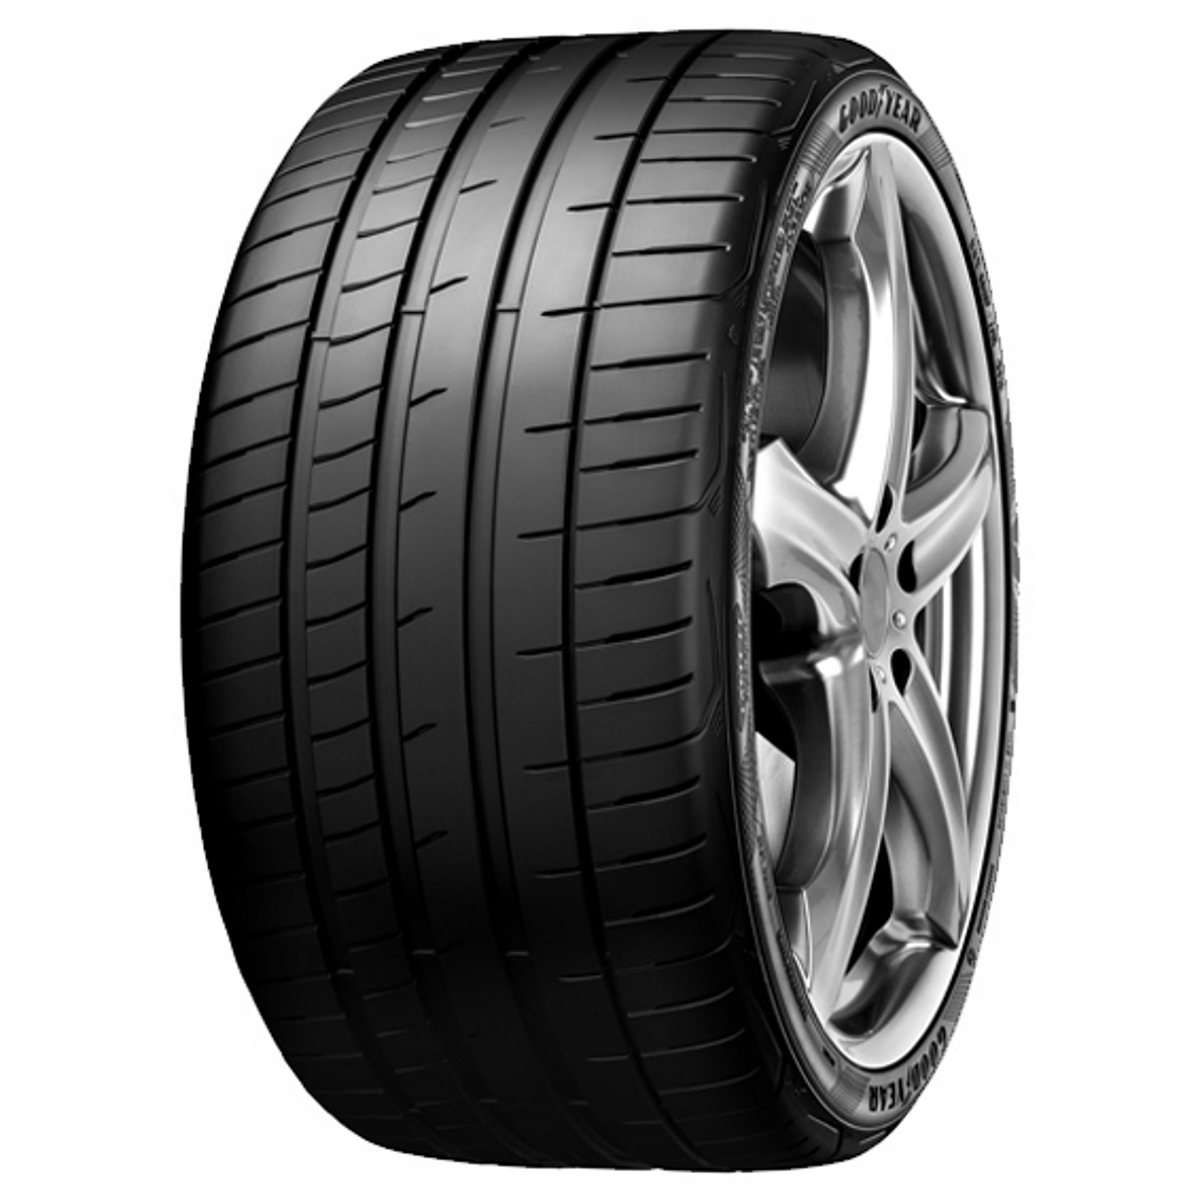 235/35R19 Goodyear 91Y EAG F1 SUPERSPORT AO XL FP let 